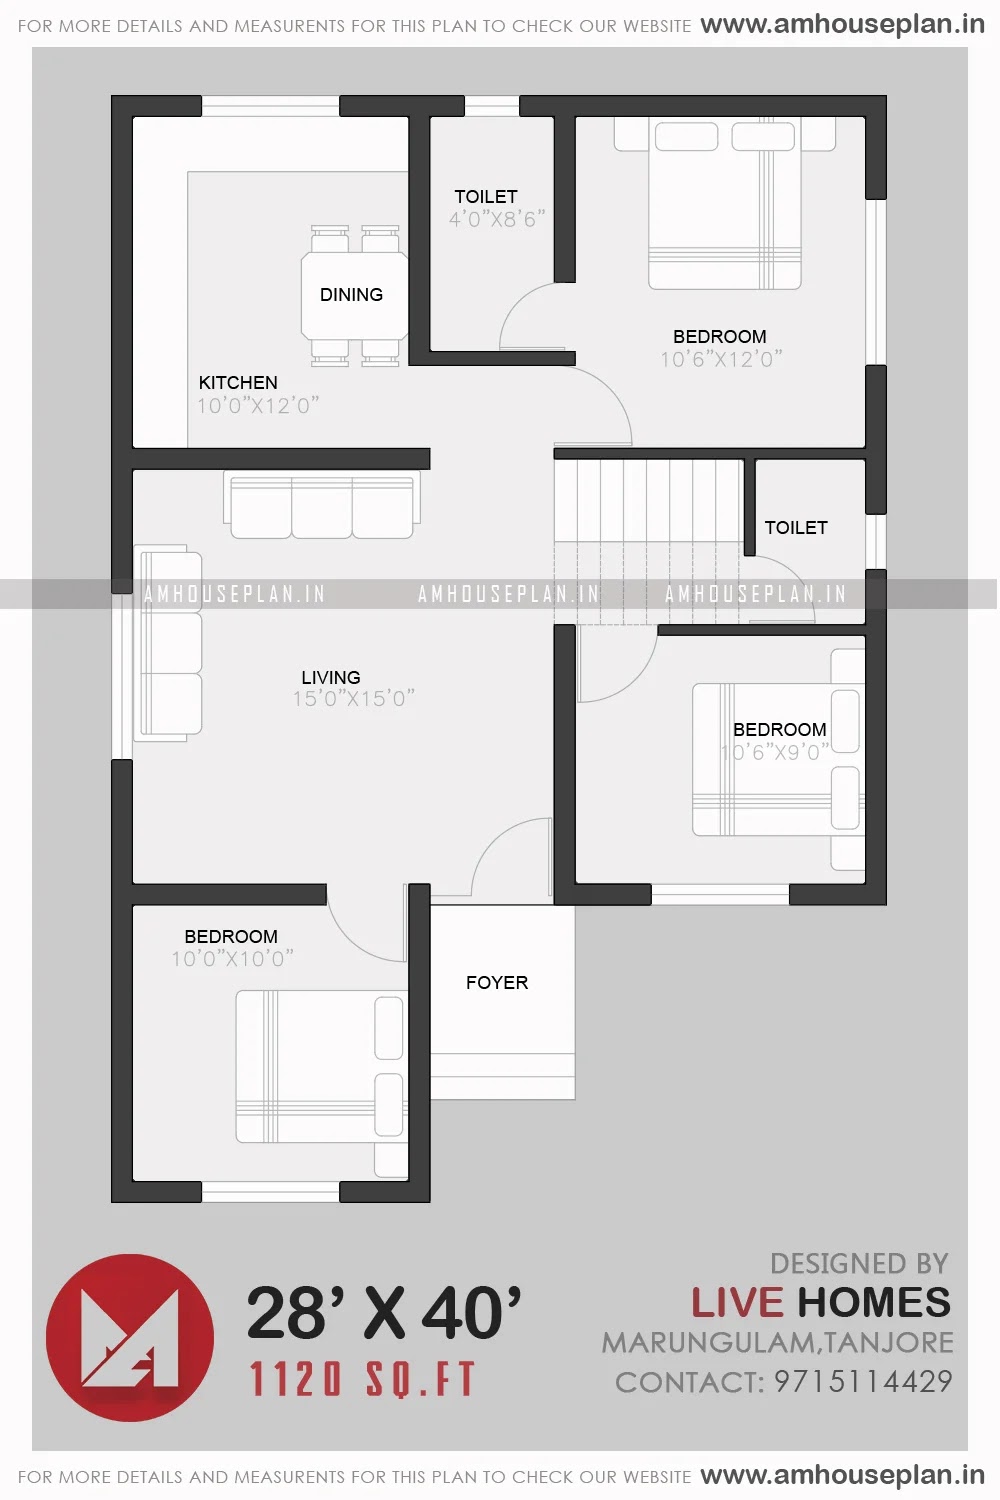 28 x 40 Simple Modern 4BHK house design with car parking